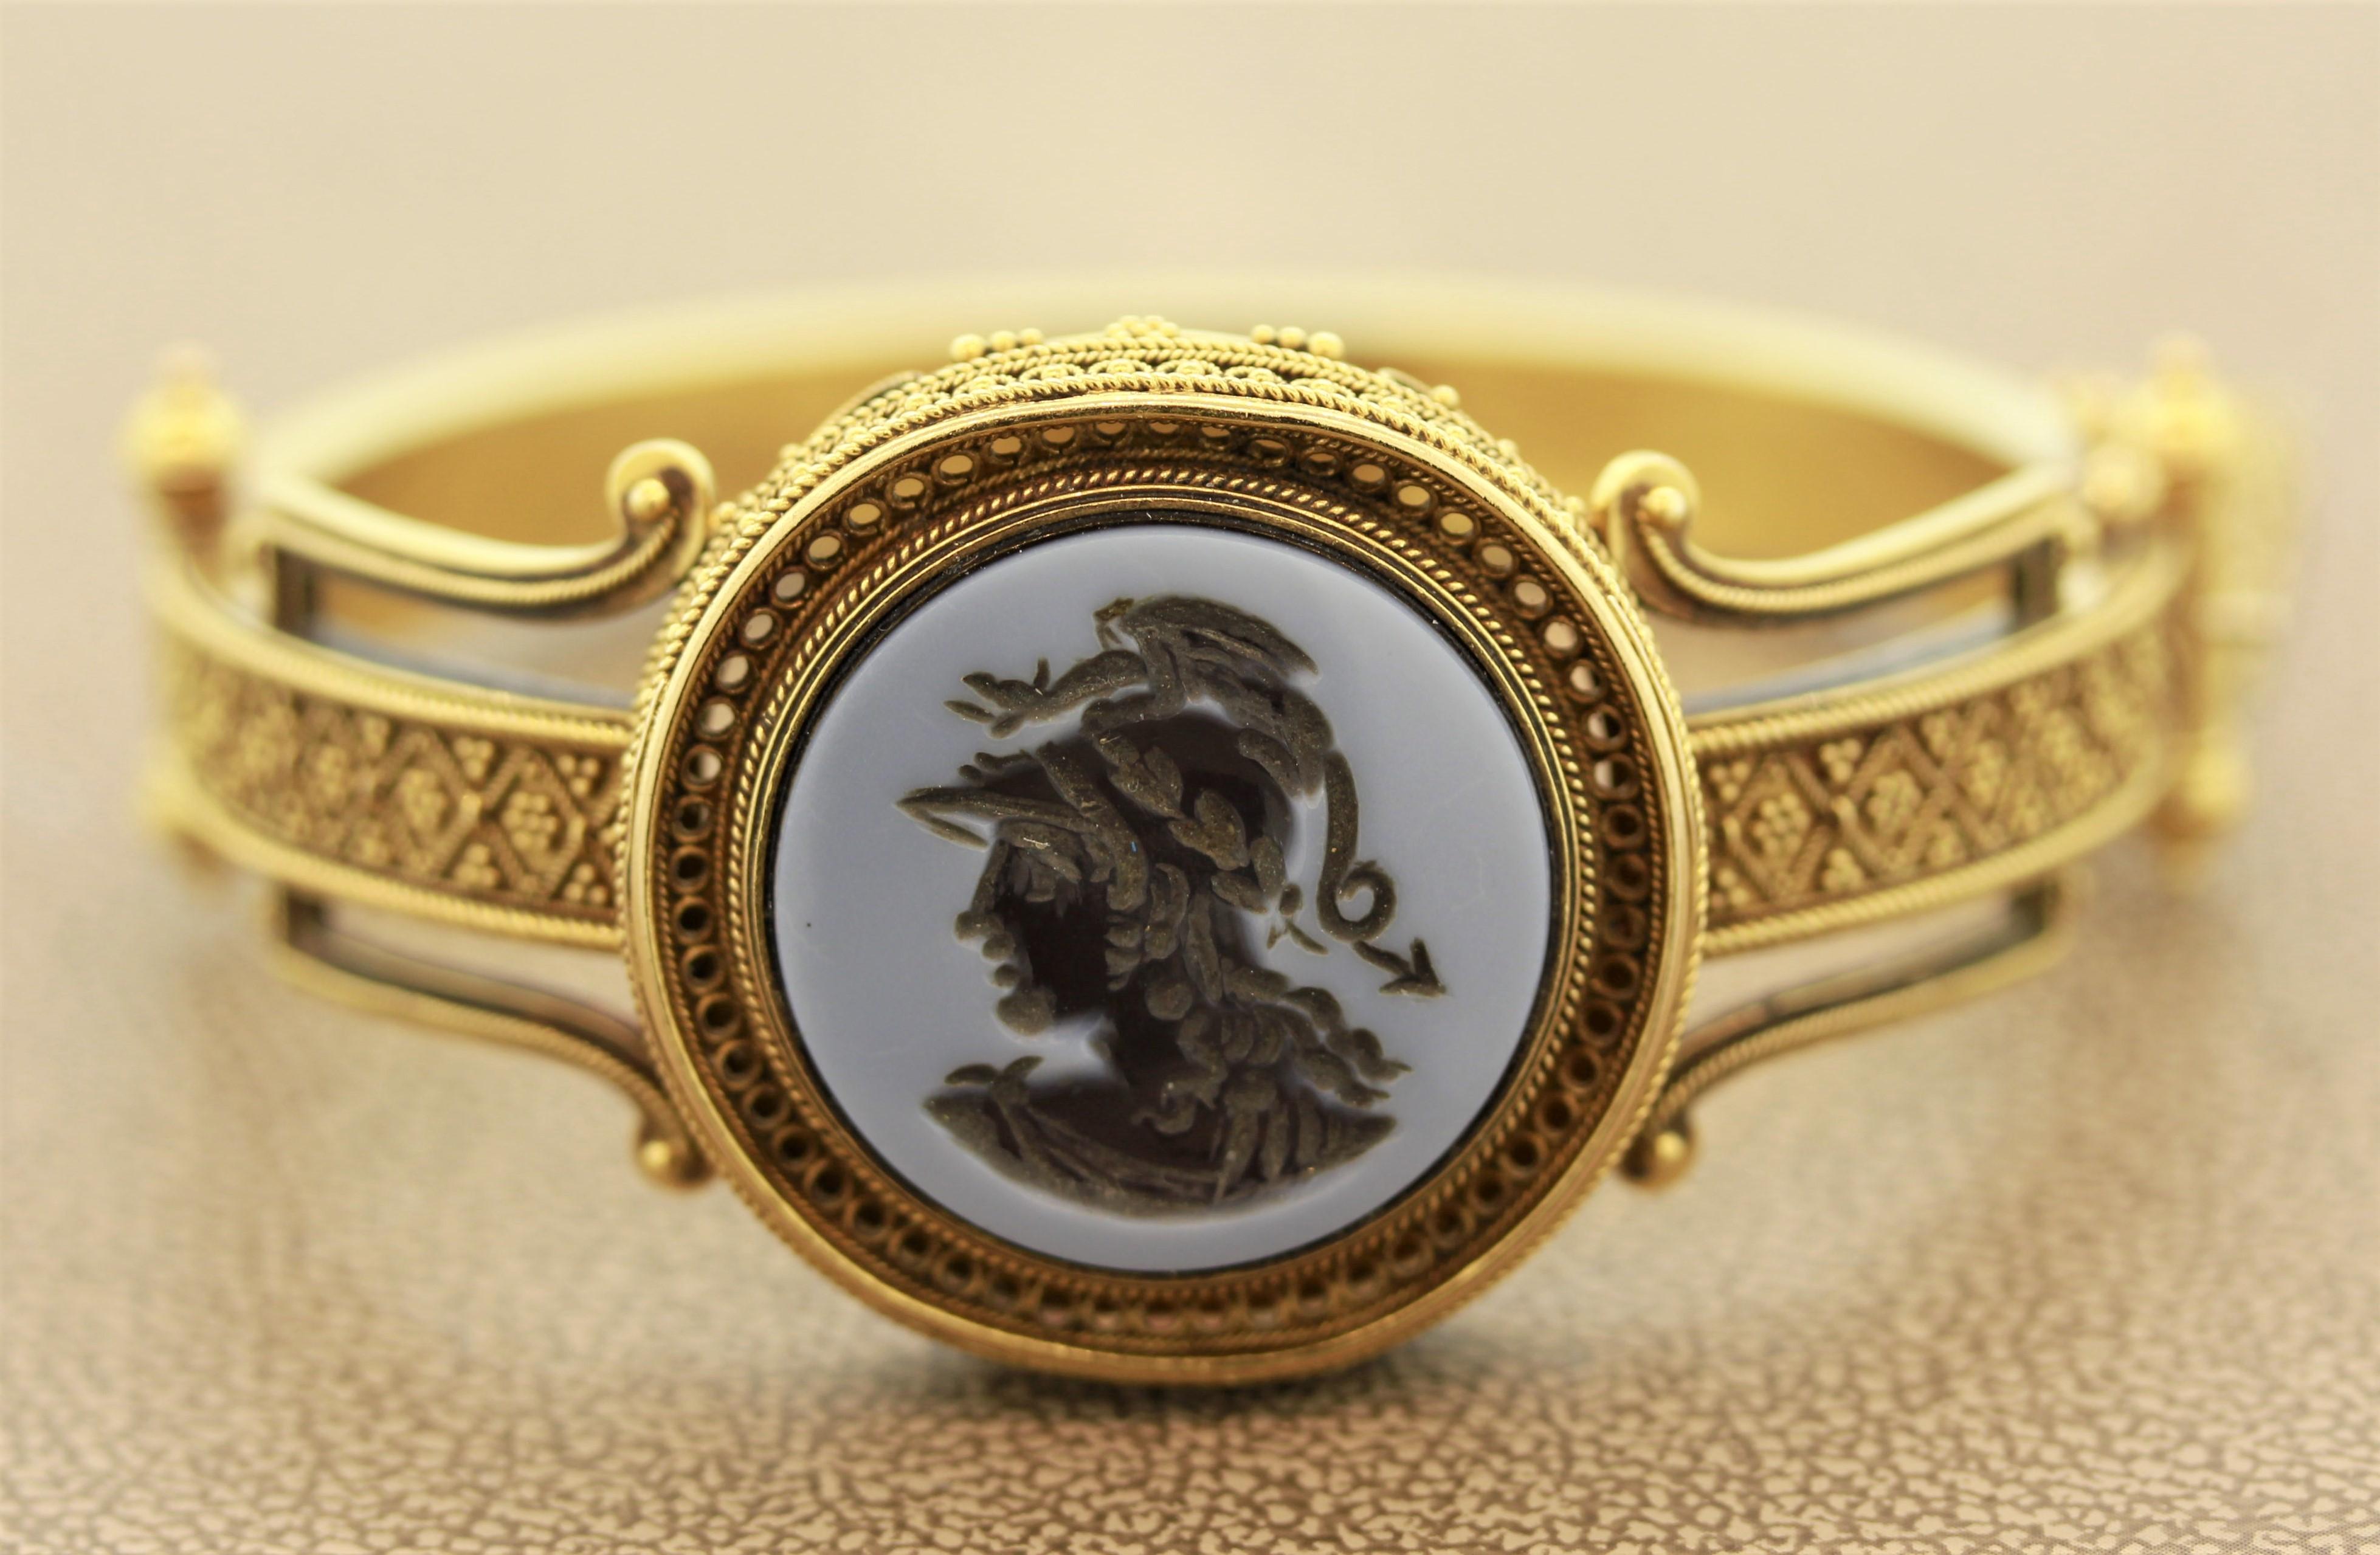 A classic piece from the end of the 19th century, this Victorian treasure features a natural onyx cameo of a regal statesman. The gold work is second to none with its intricate details and filigree work. Made in 14k yellow gold and in original